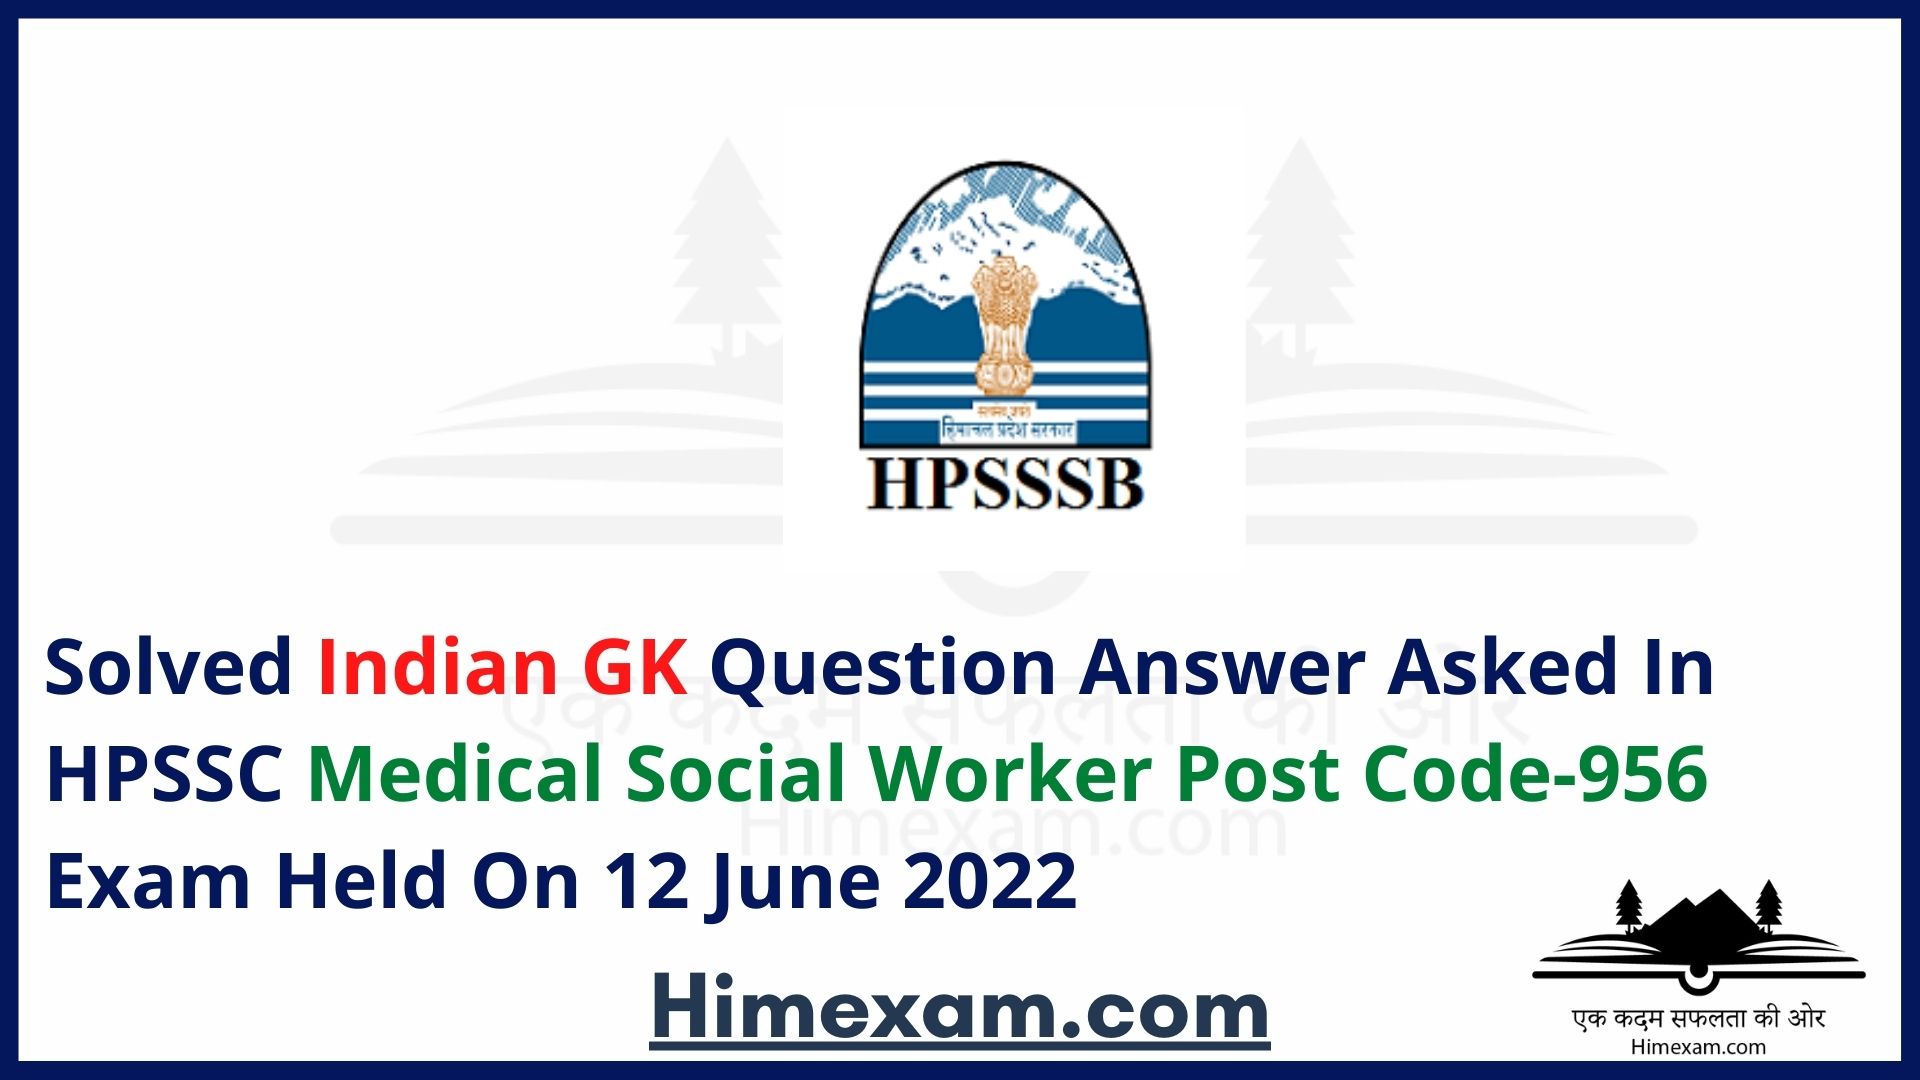 Solved Indian GK Question Answer Asked In HPSSC Medical Social Worker Post Code-956 Exam Held On 12 June 2022